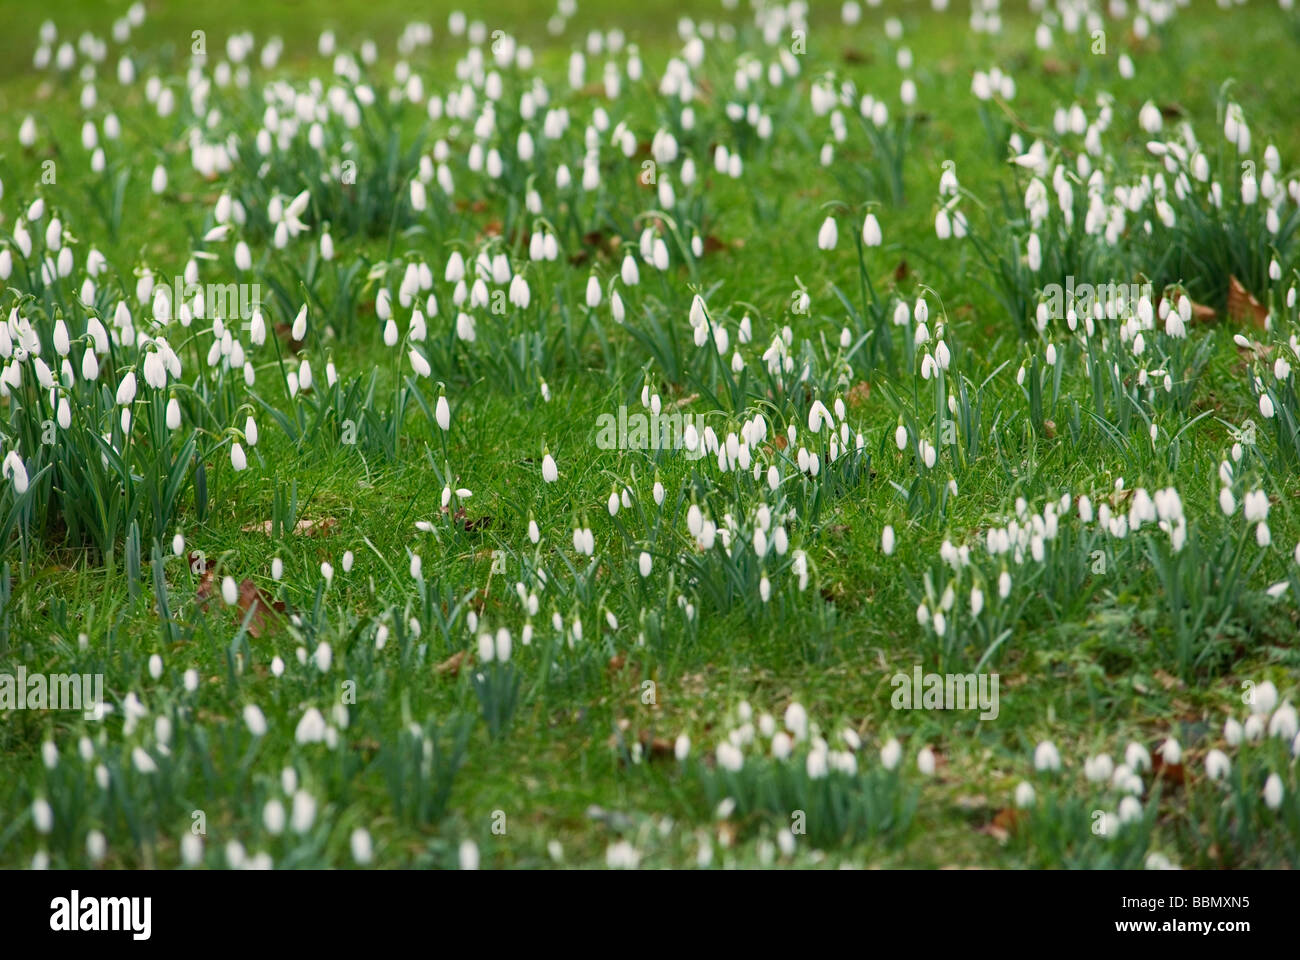 GALANTHUS NIVALIS SNOWDROPS NATURALISED  IN GRASS Stock Photo